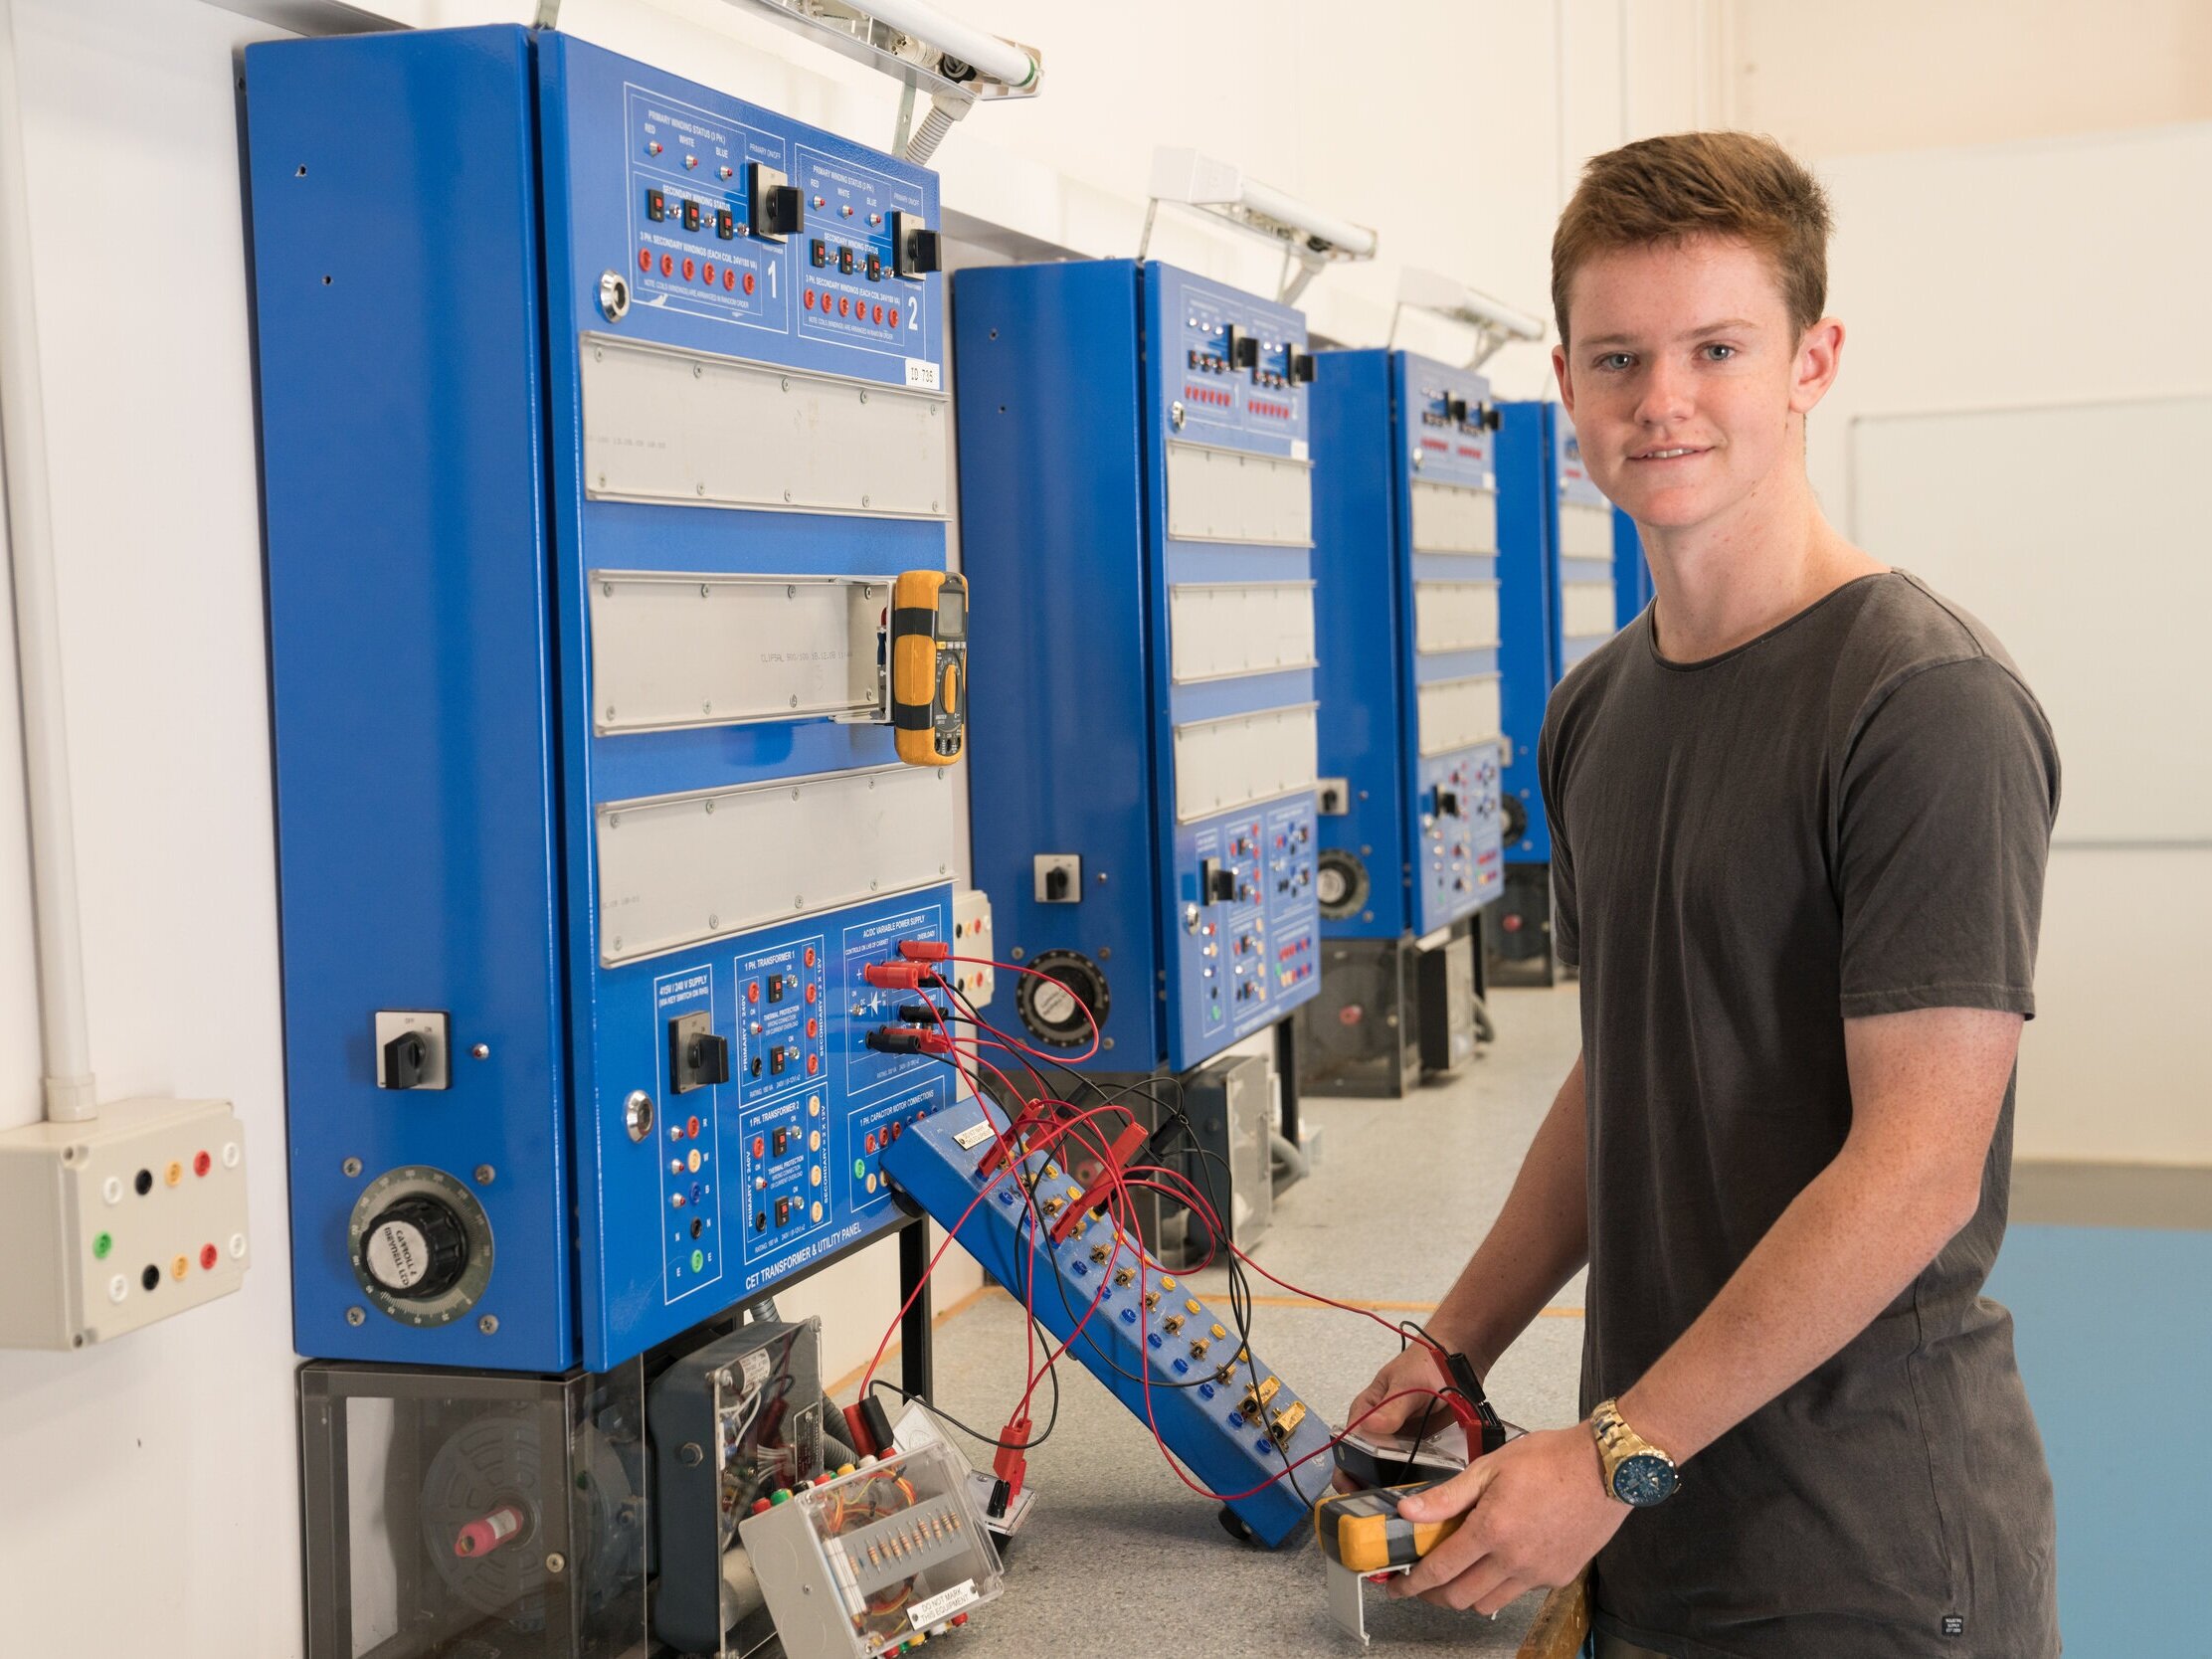 Ronan McGrath completed a Pre- Apprenticeship with College of Electrical Training and a work placement which contributed to WACE. Upon graduation, he was successful in gaining a full time apprenticeship.